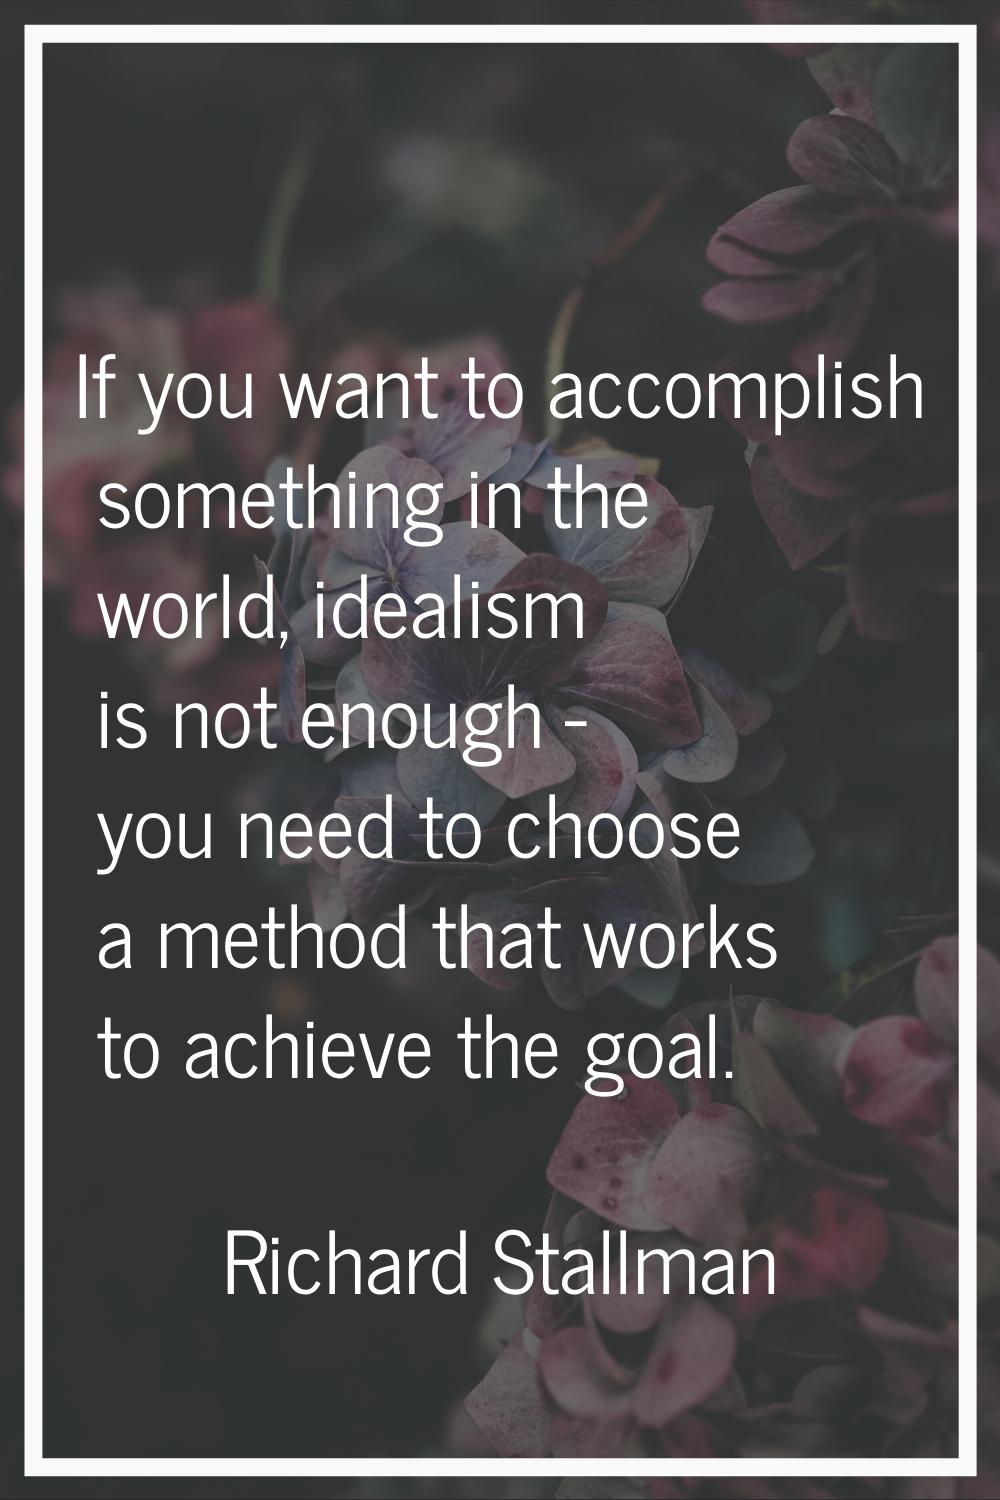 If you want to accomplish something in the world, idealism is not enough - you need to choose a met